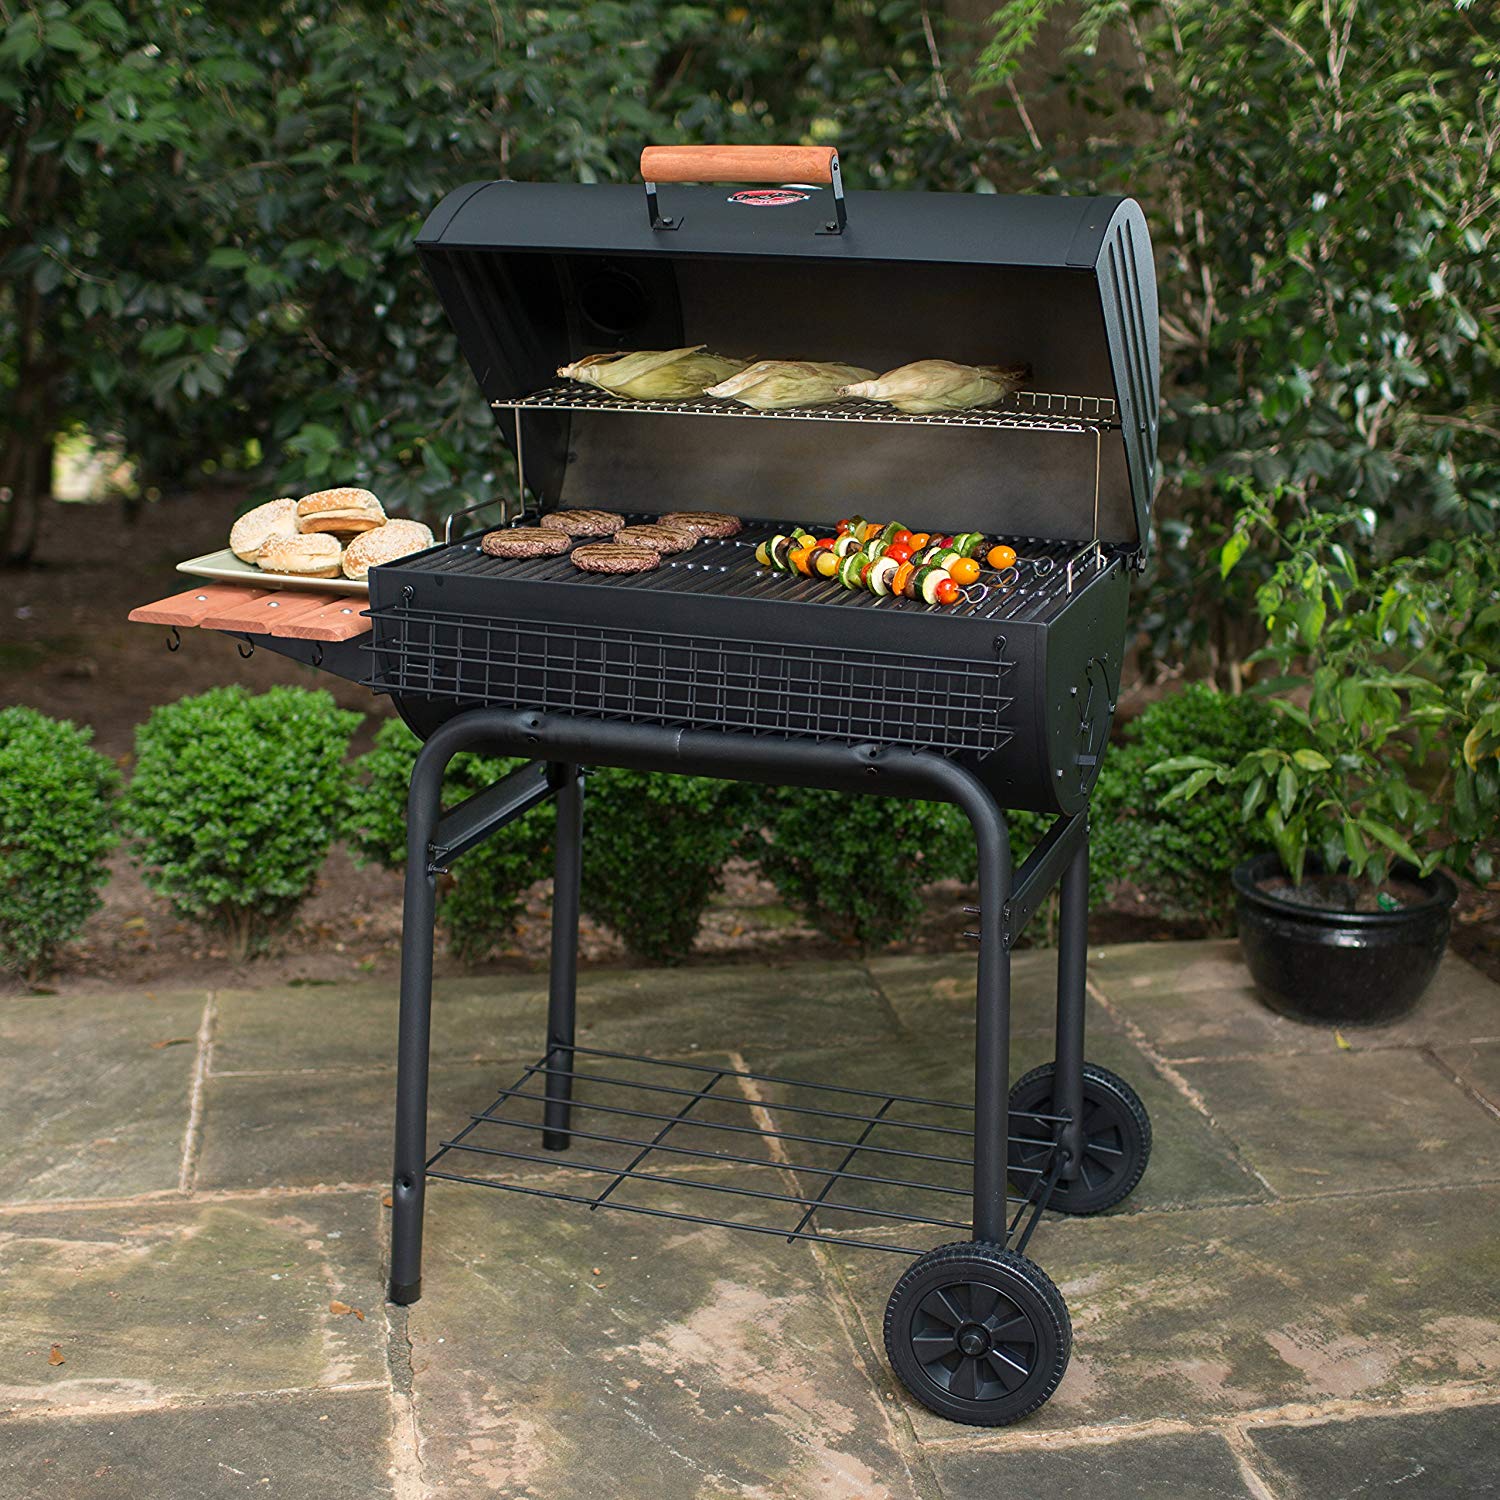 BBQ Stove For Sale - Buy Electric, Charcoal and Propane Grills At Best Prices